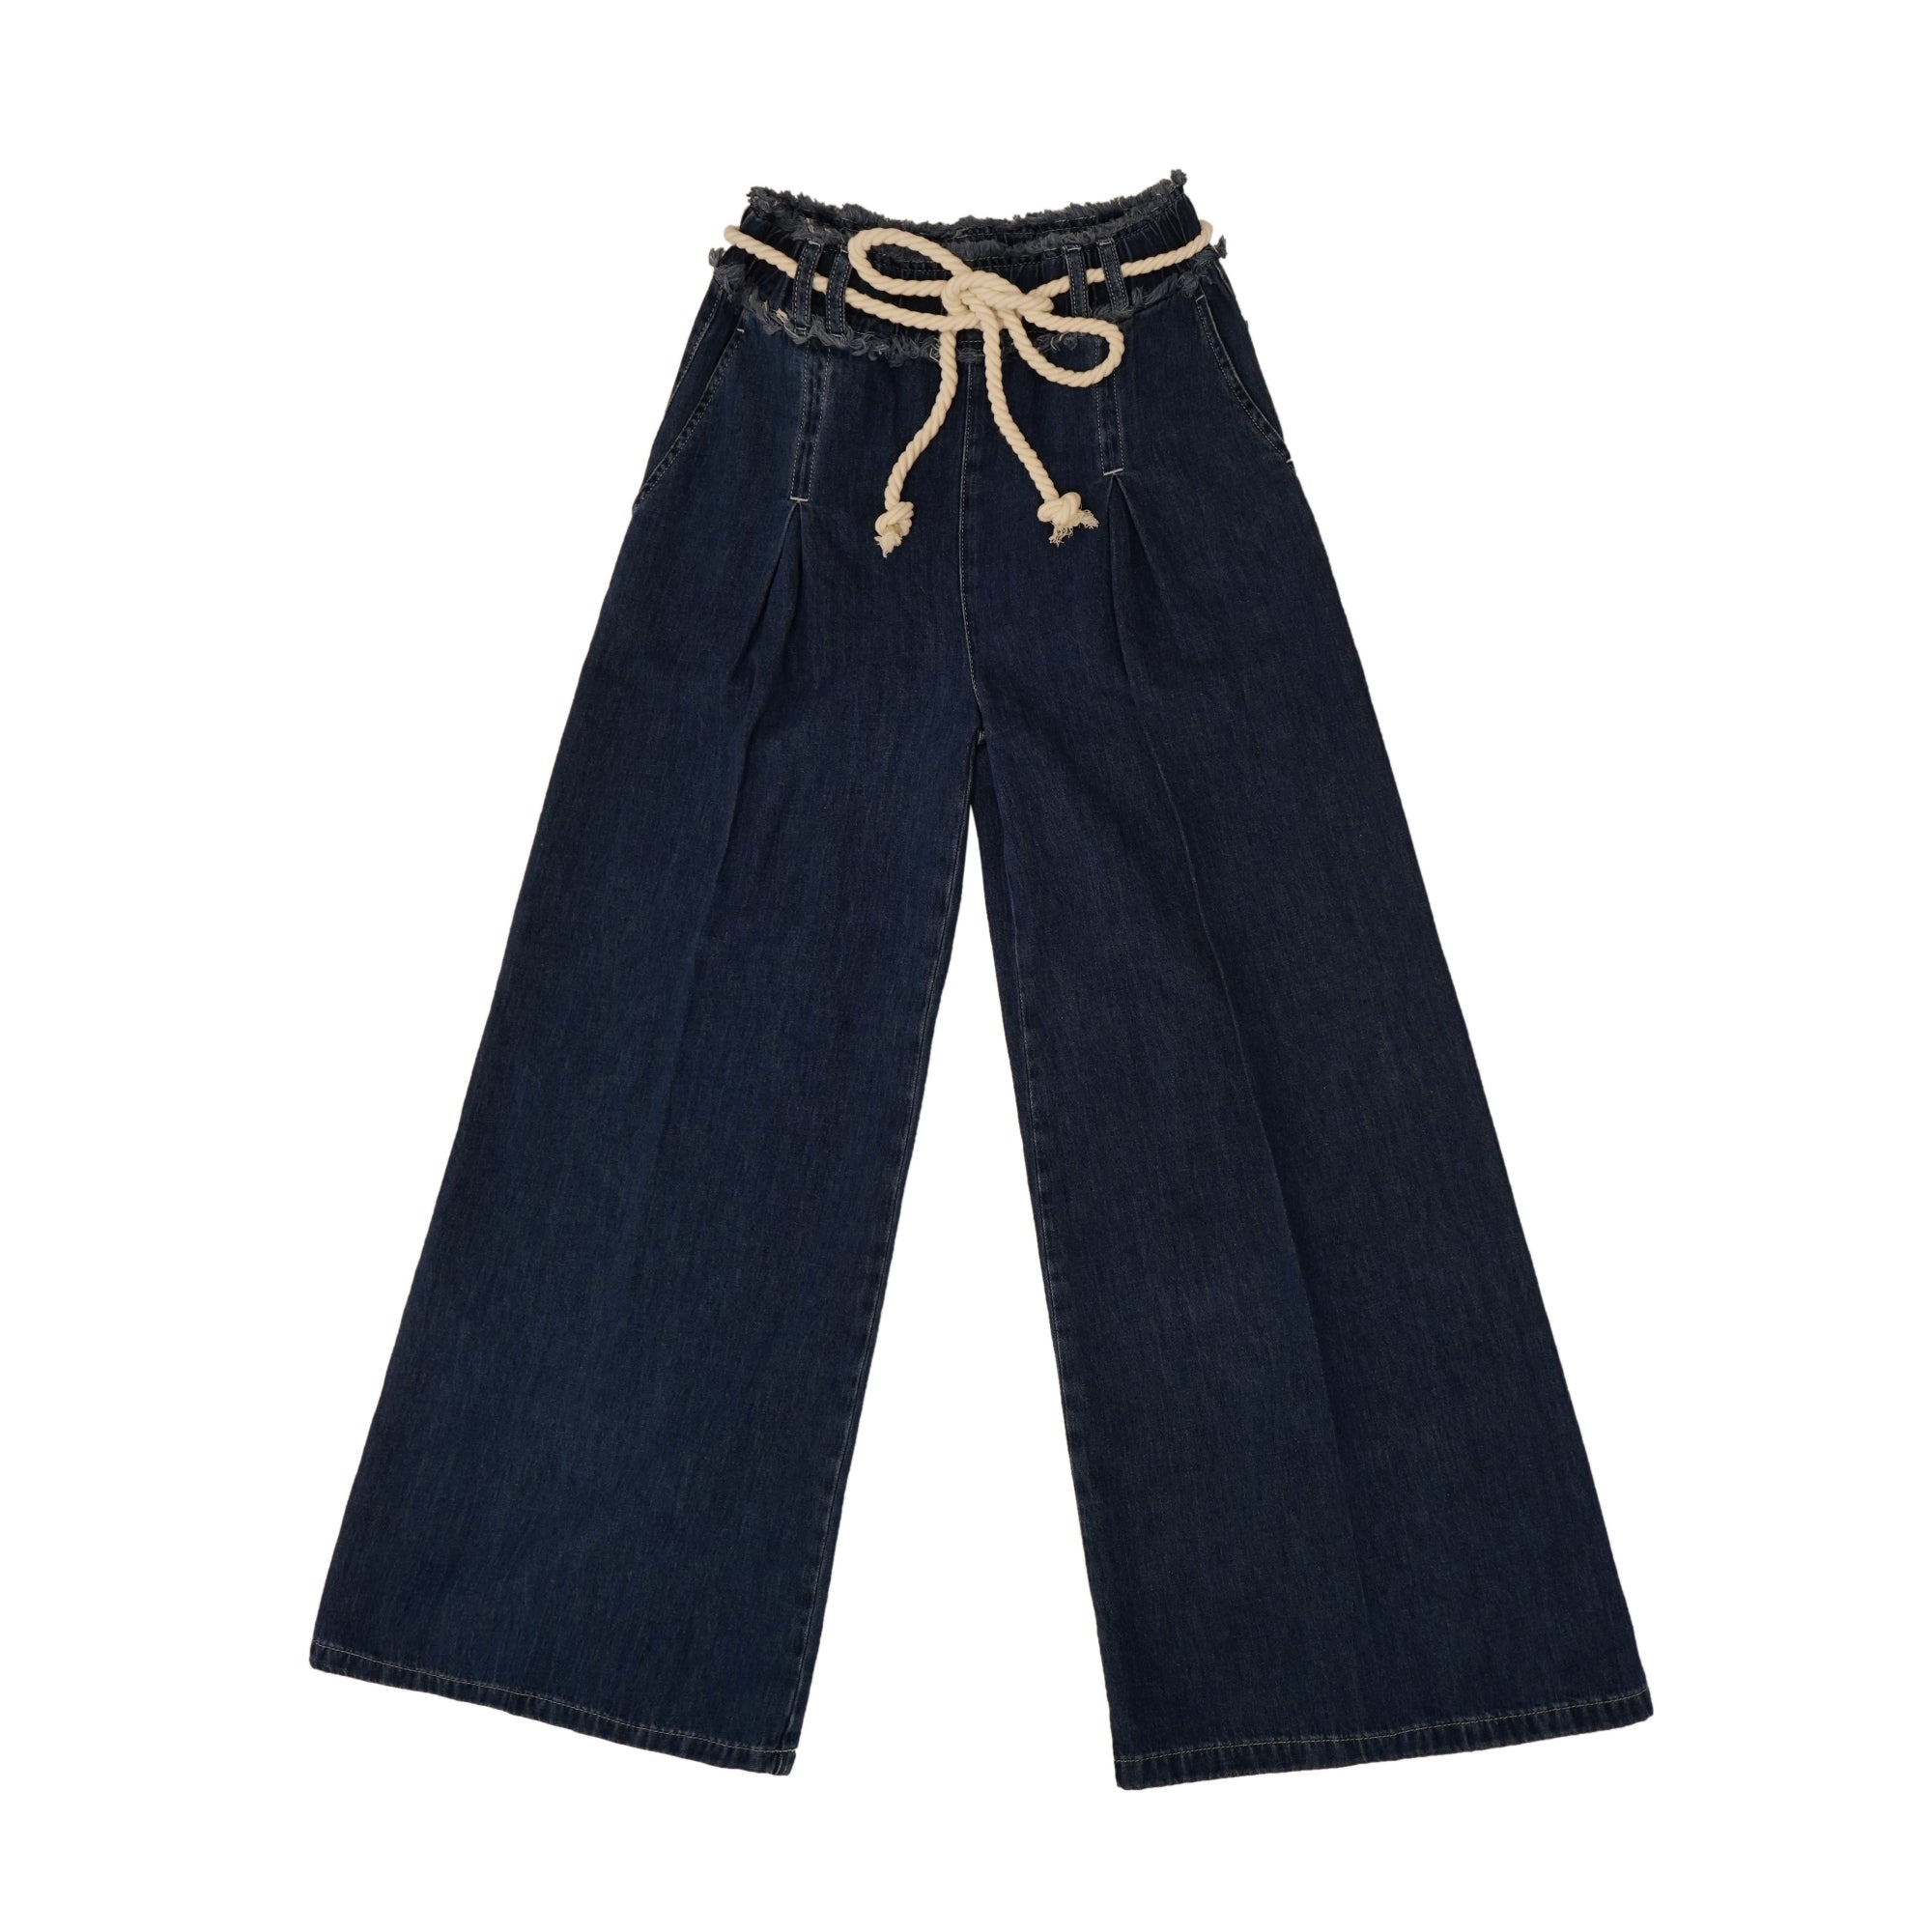 Relaxed Fit Indigo Drawstring Trousers